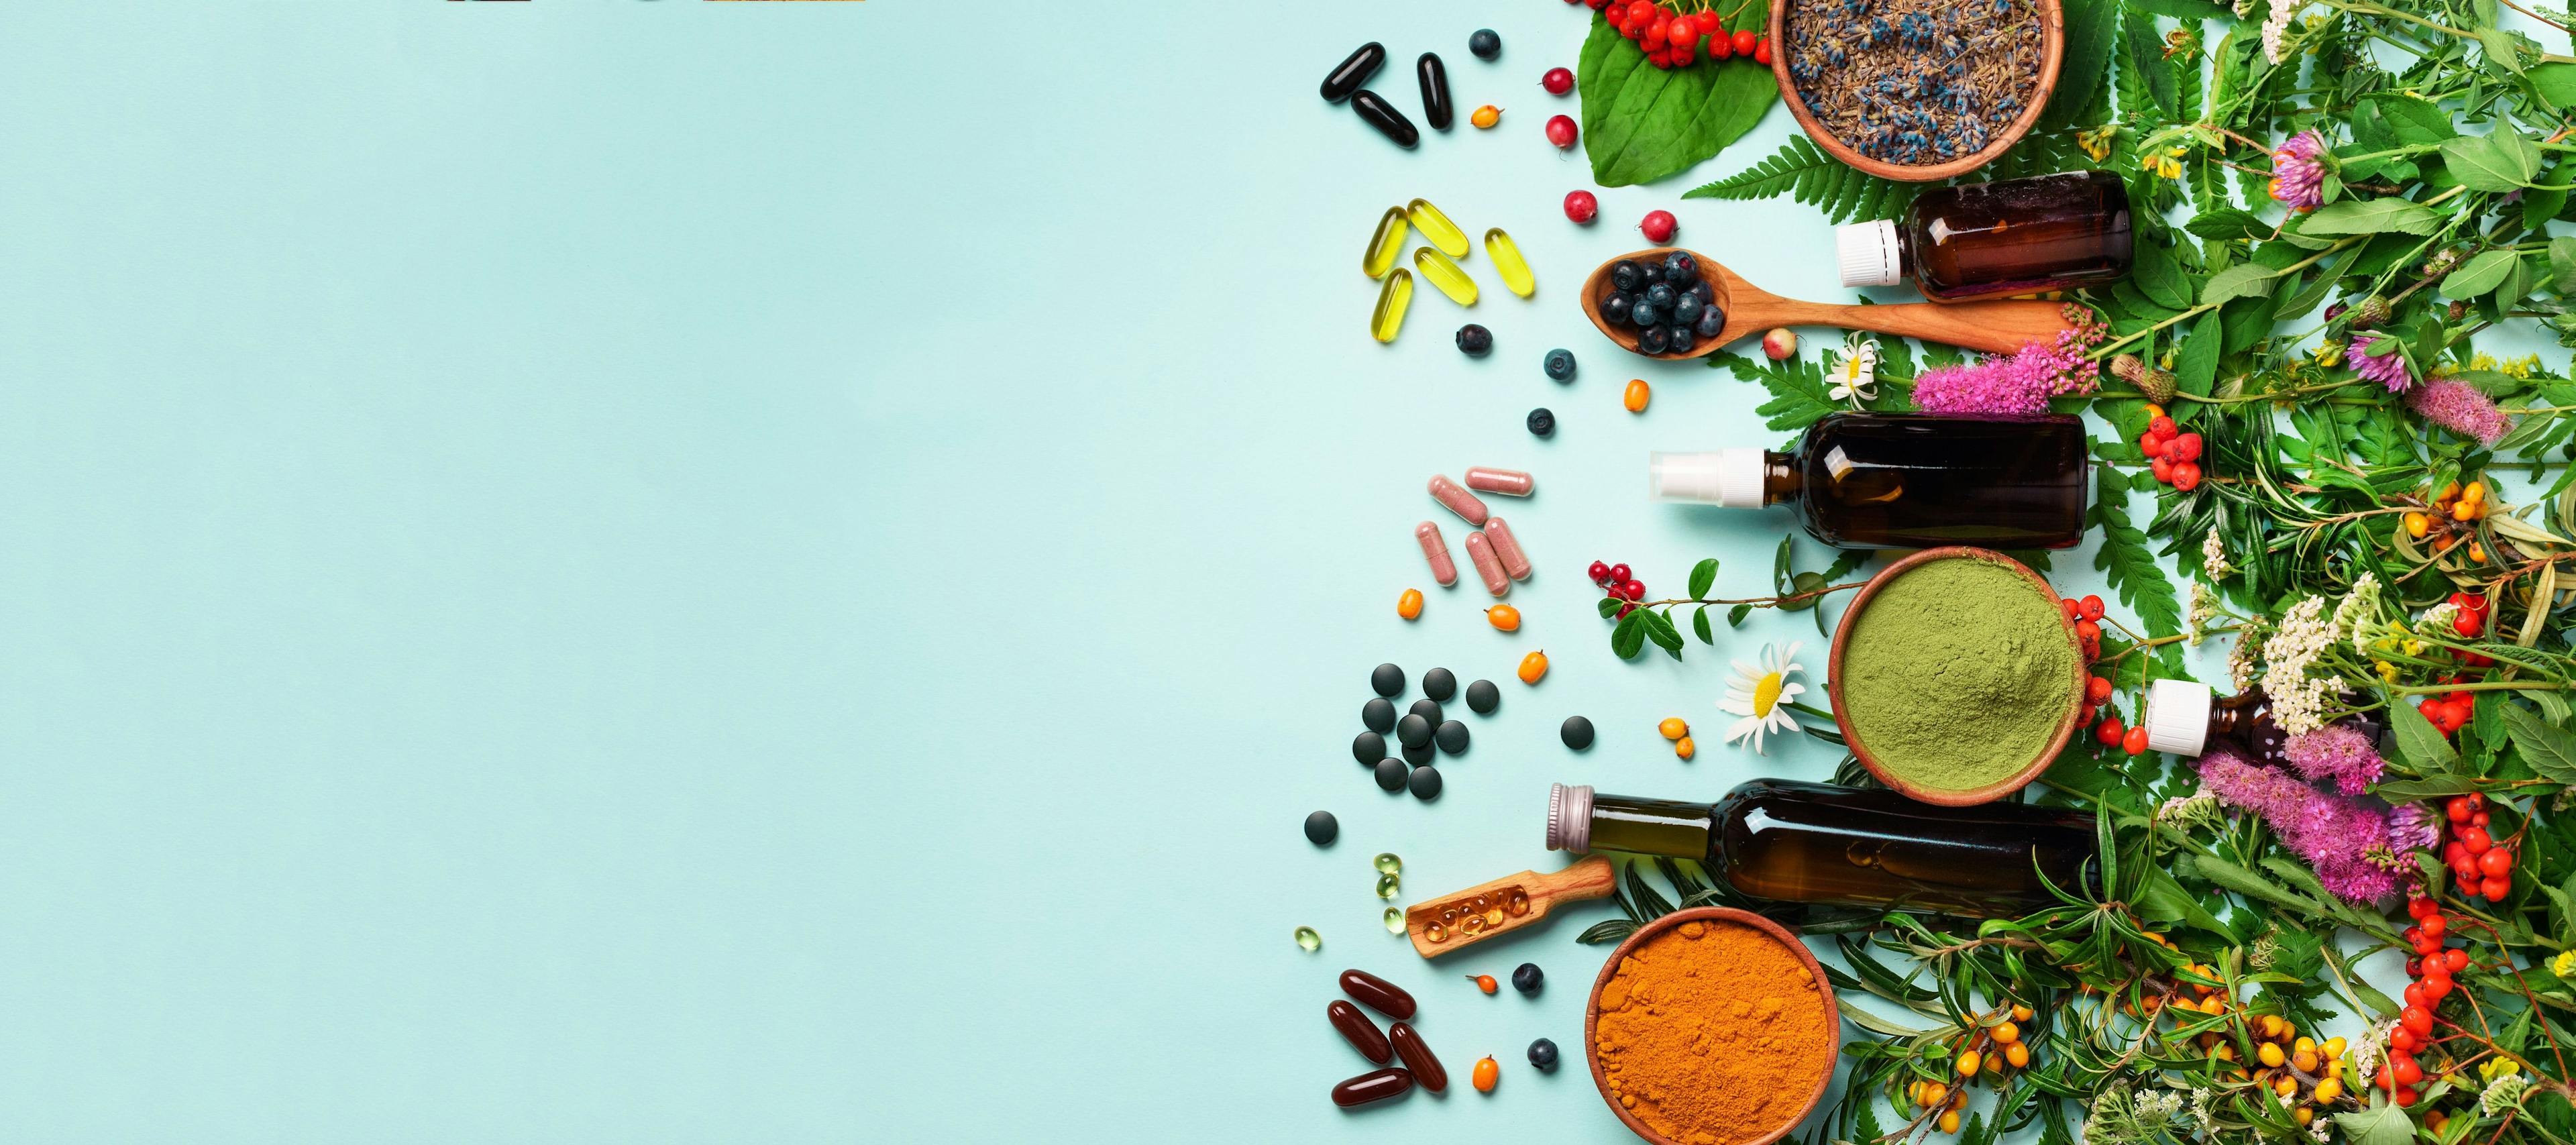 Holistic medicine approach. Healthy food eating, dietary supplements, healing herbs and flowers. Turmeric, dried lavender, spirulina powder in wooden bowls, fresh berries, omega acid capsules | Image Credit: © jchizhe - stock.adobe.com